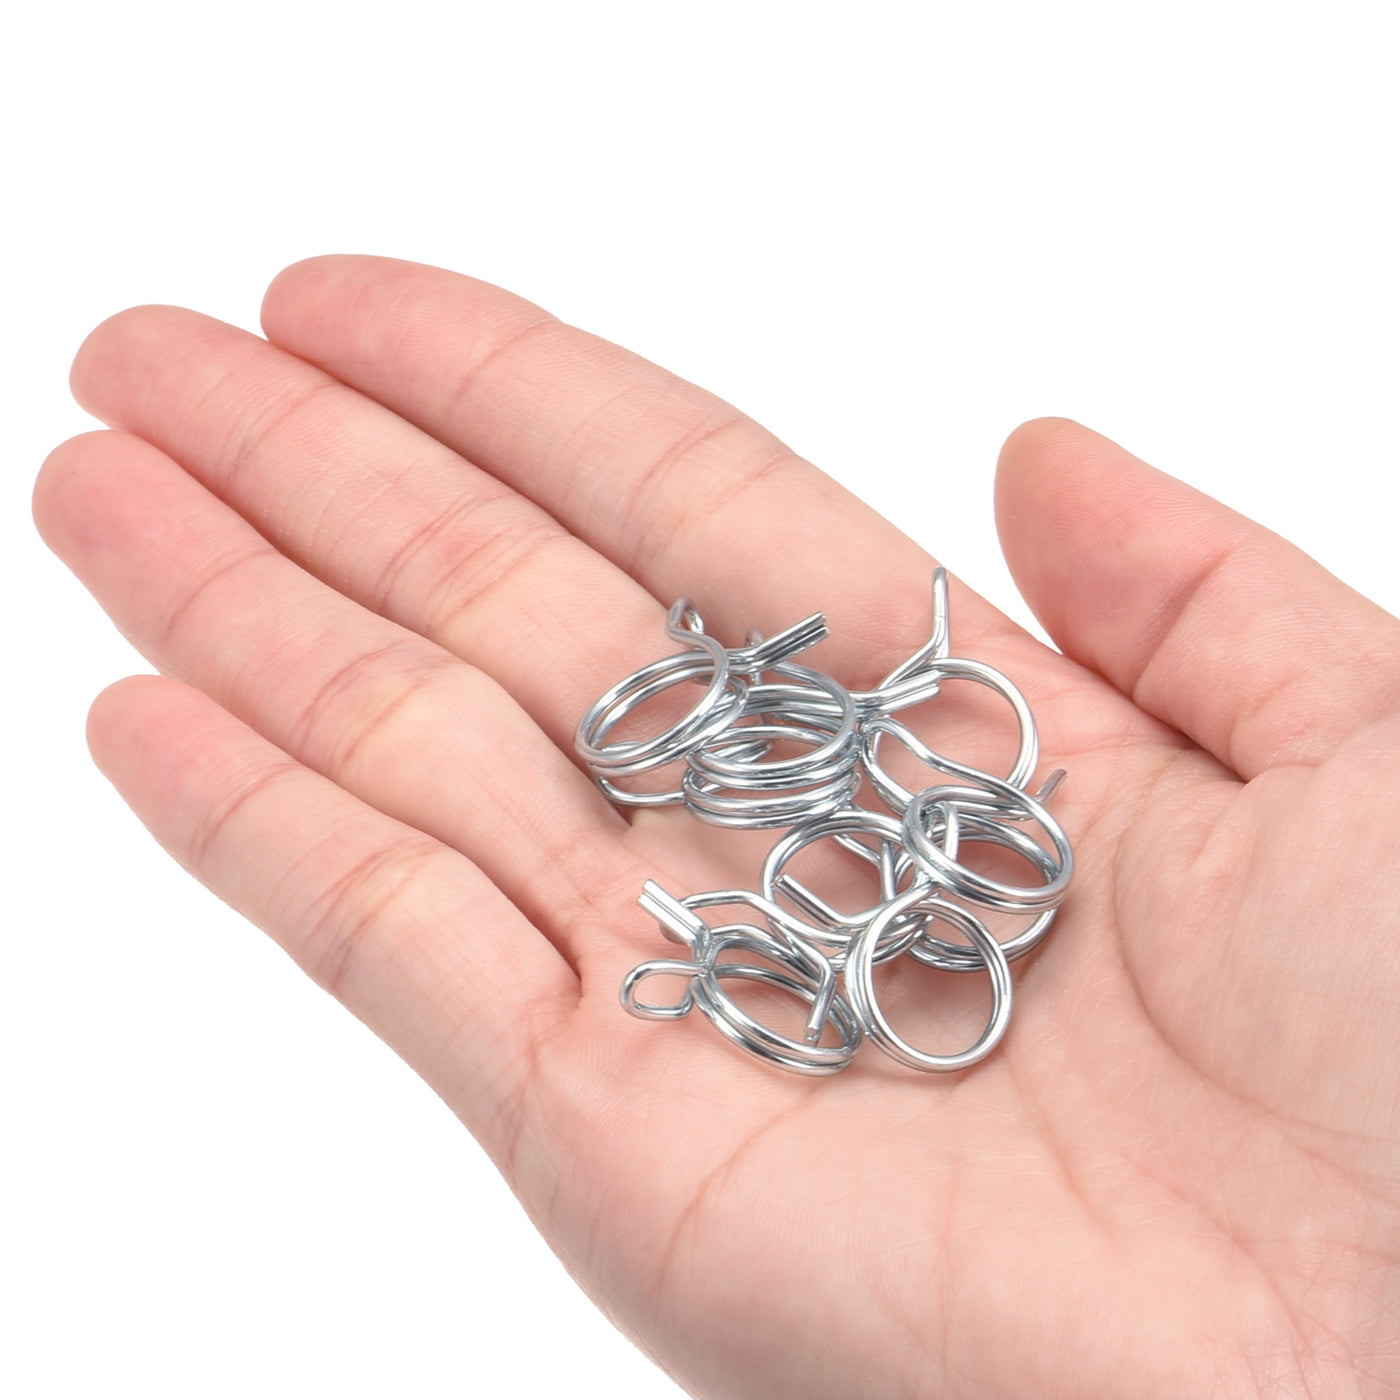 Uxcell Uxcell Double Wire Spring Hose Clamp, 50pcs 65Mn Steel 11mm Spring Clips, Silver Tone